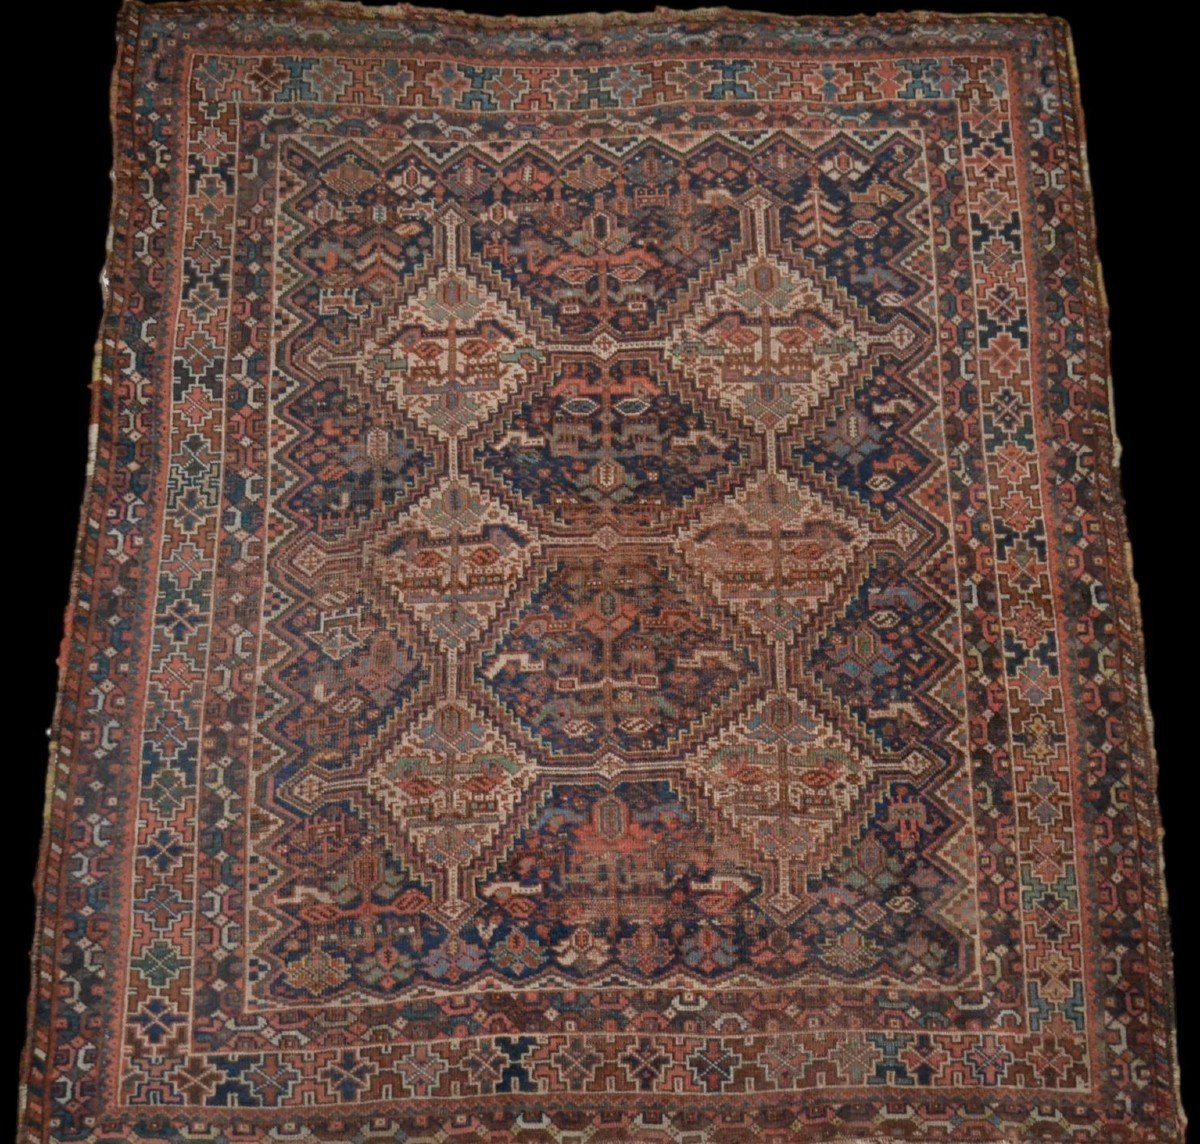 Khamseh Nomad Carpet, 172 X 198 Cm, Wool On Wool, Hand-knotted In Iran, Early 20th Century